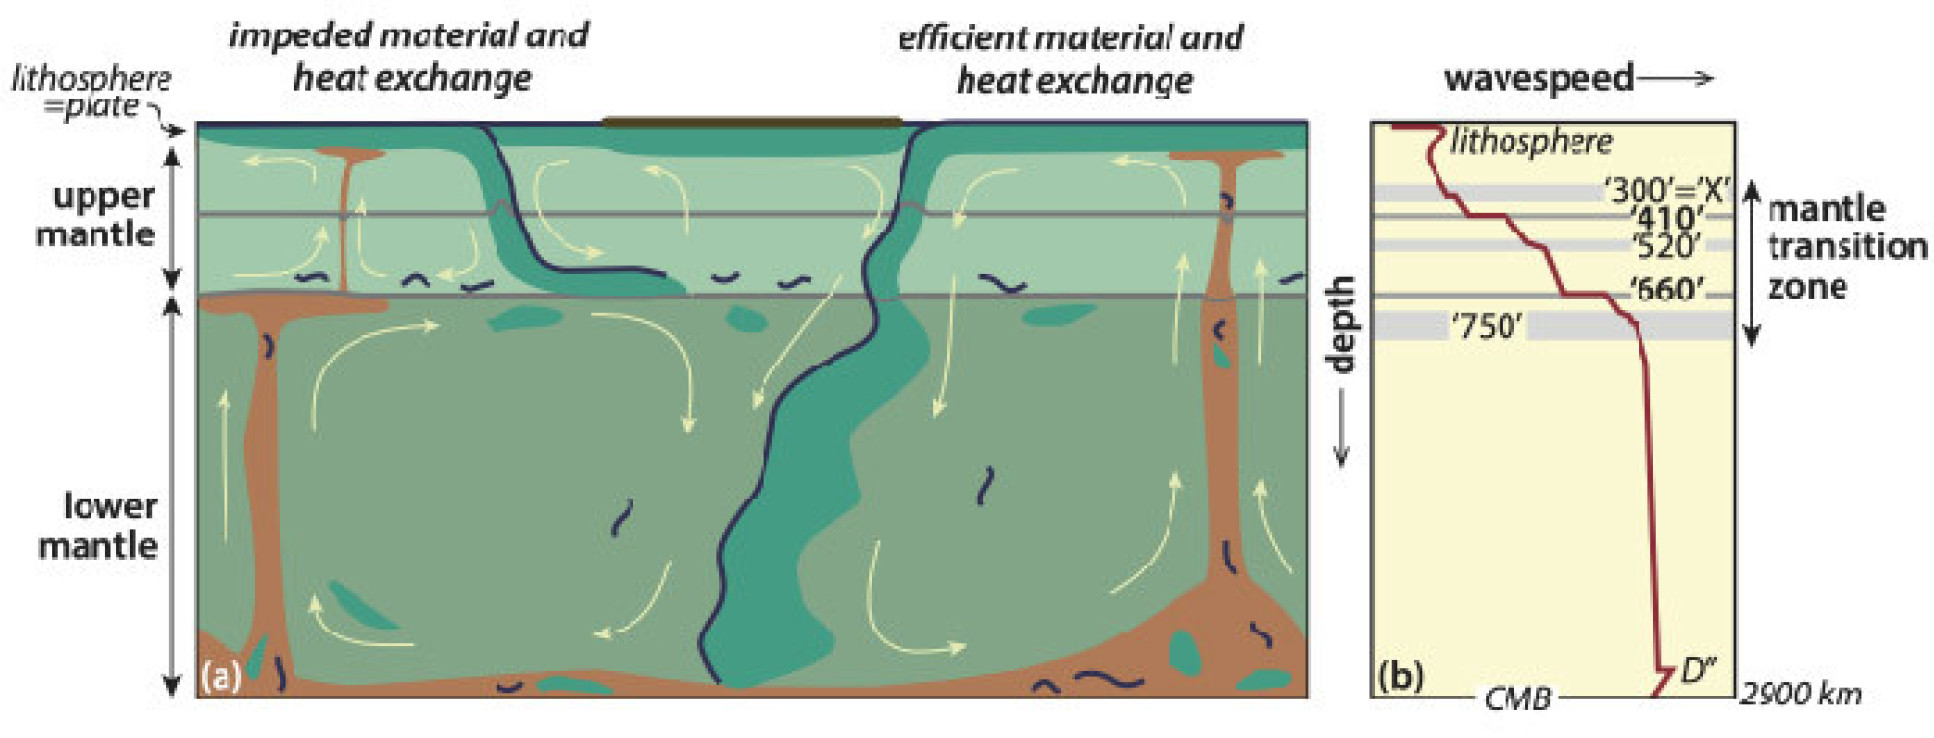 A cross section through the mantle showing two layers and increasing seismic wave speed with depth